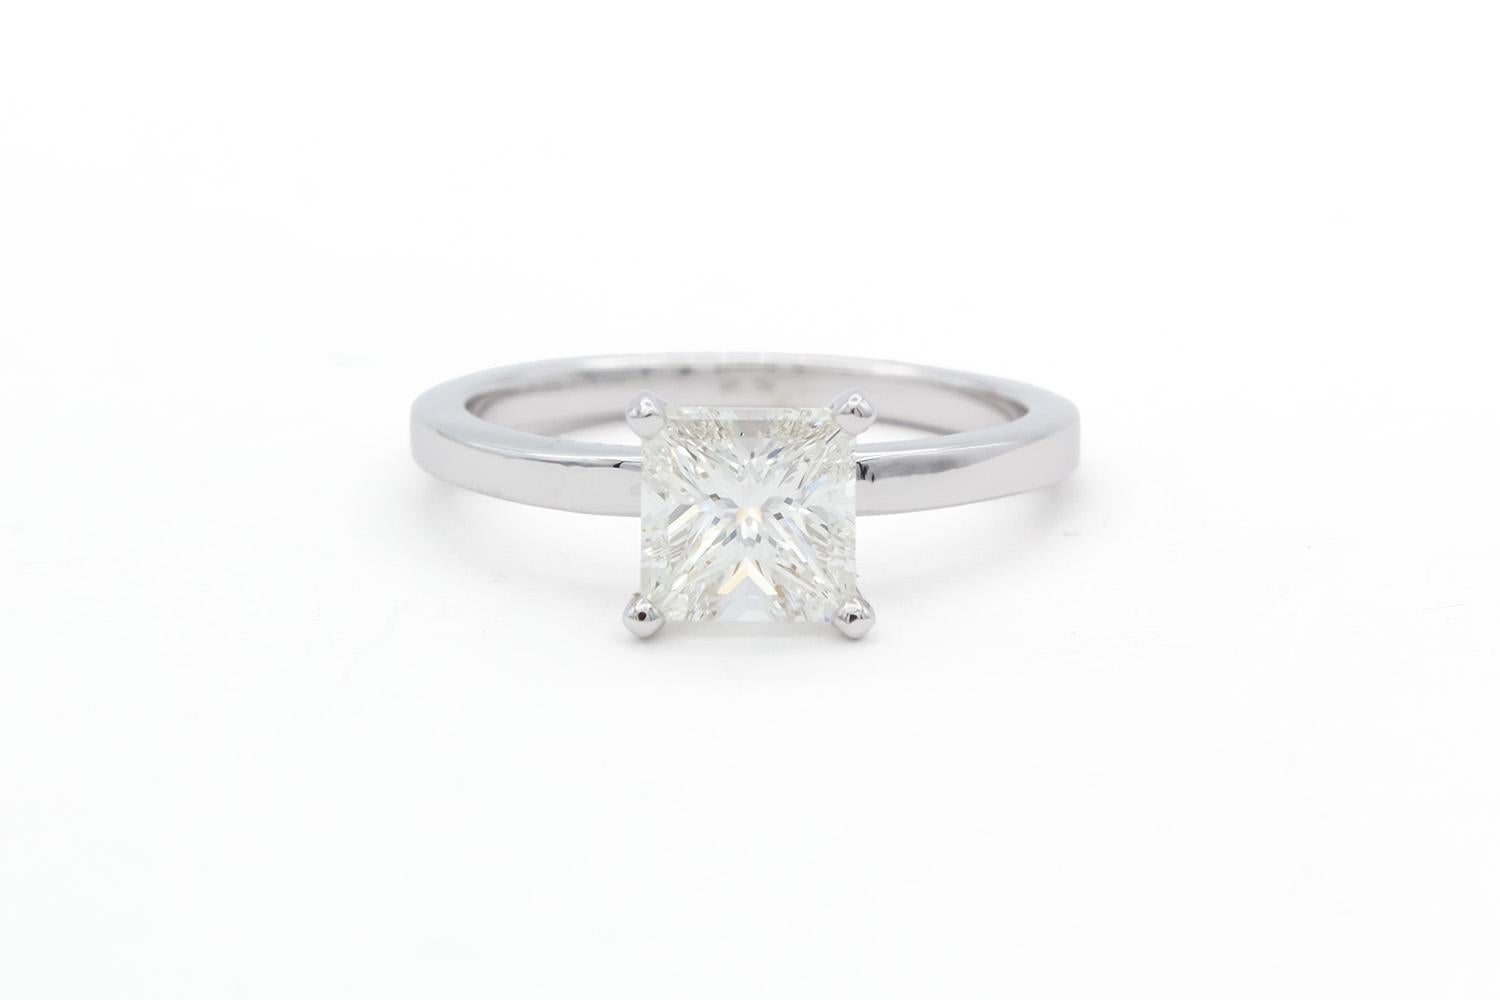 We are pleased to offer this GIA Certified & Laser Inscribed 18k White Gold & Princess Cut Diamond Solitaire Engagement Ring. This beautiful ring features a GIA certified & laser inscribed 1.50ct H/SI2 princess cut diamond set in a classic 18k white